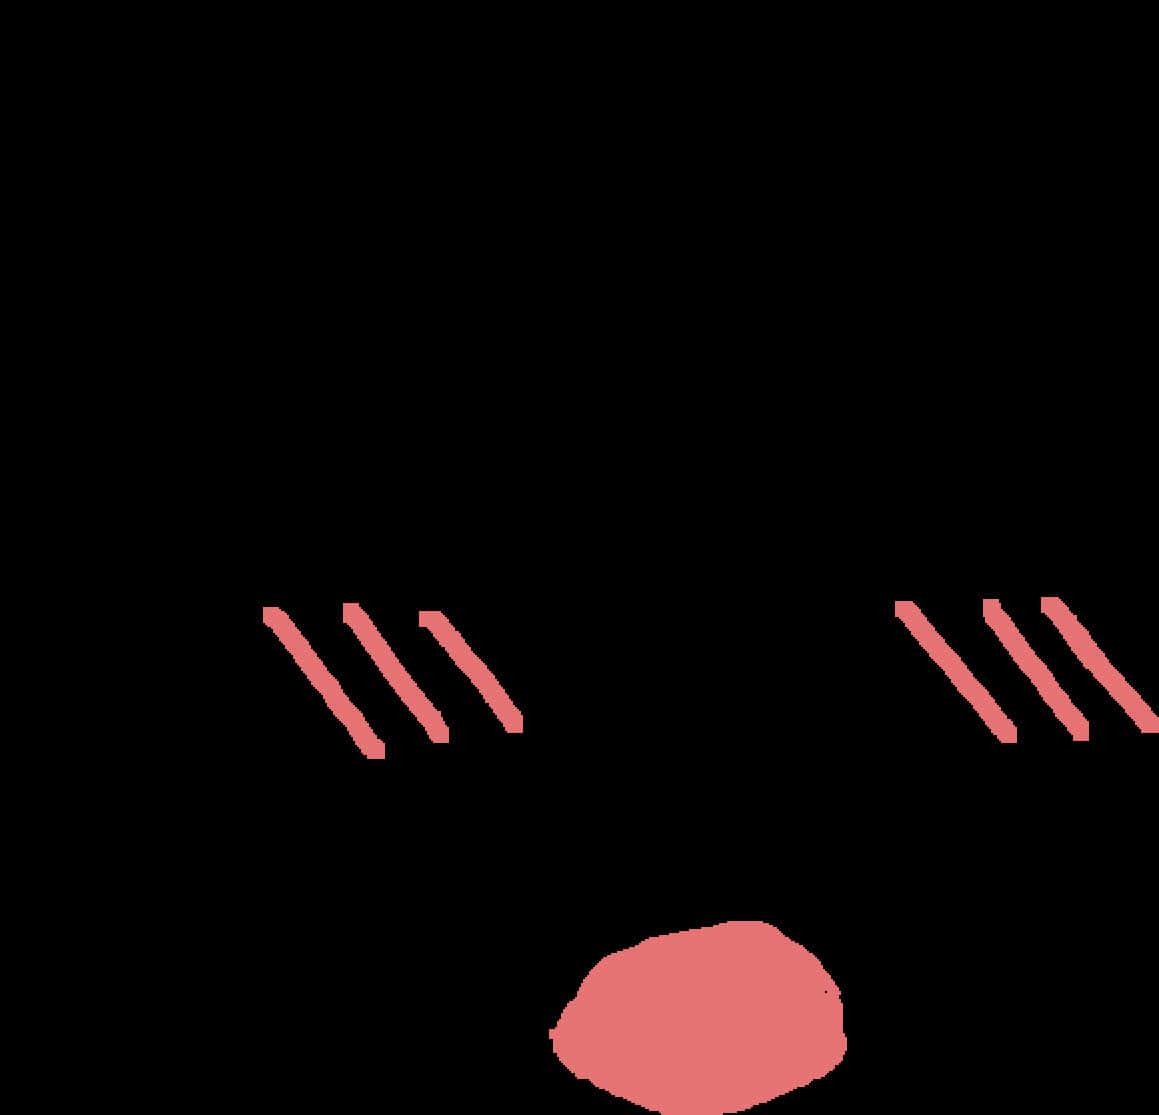 A Black And Pink Face With Mouth And Nose